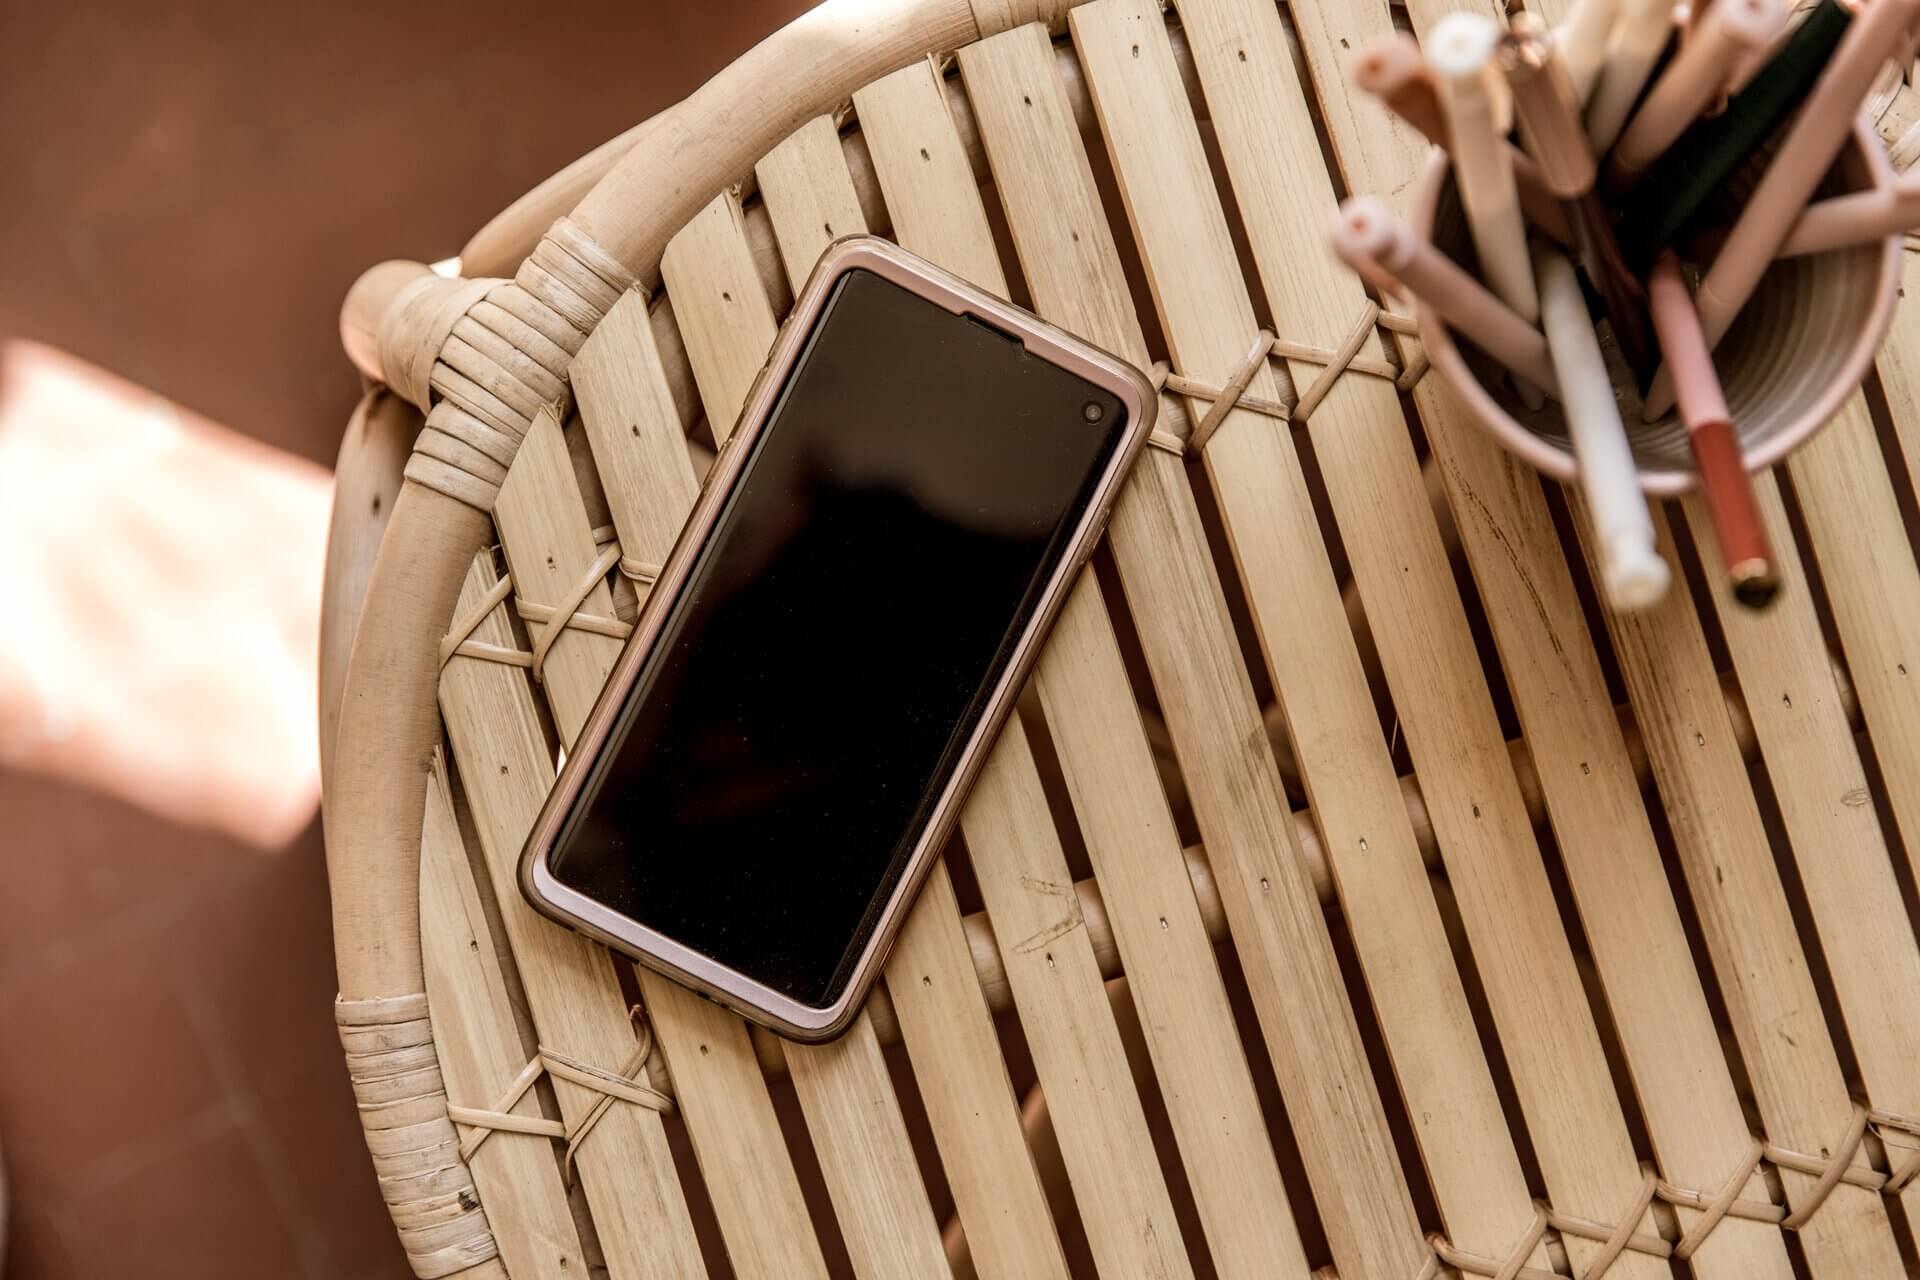 Phone on a wicker table that would be showing a contact page if I knew how to use Photoshop